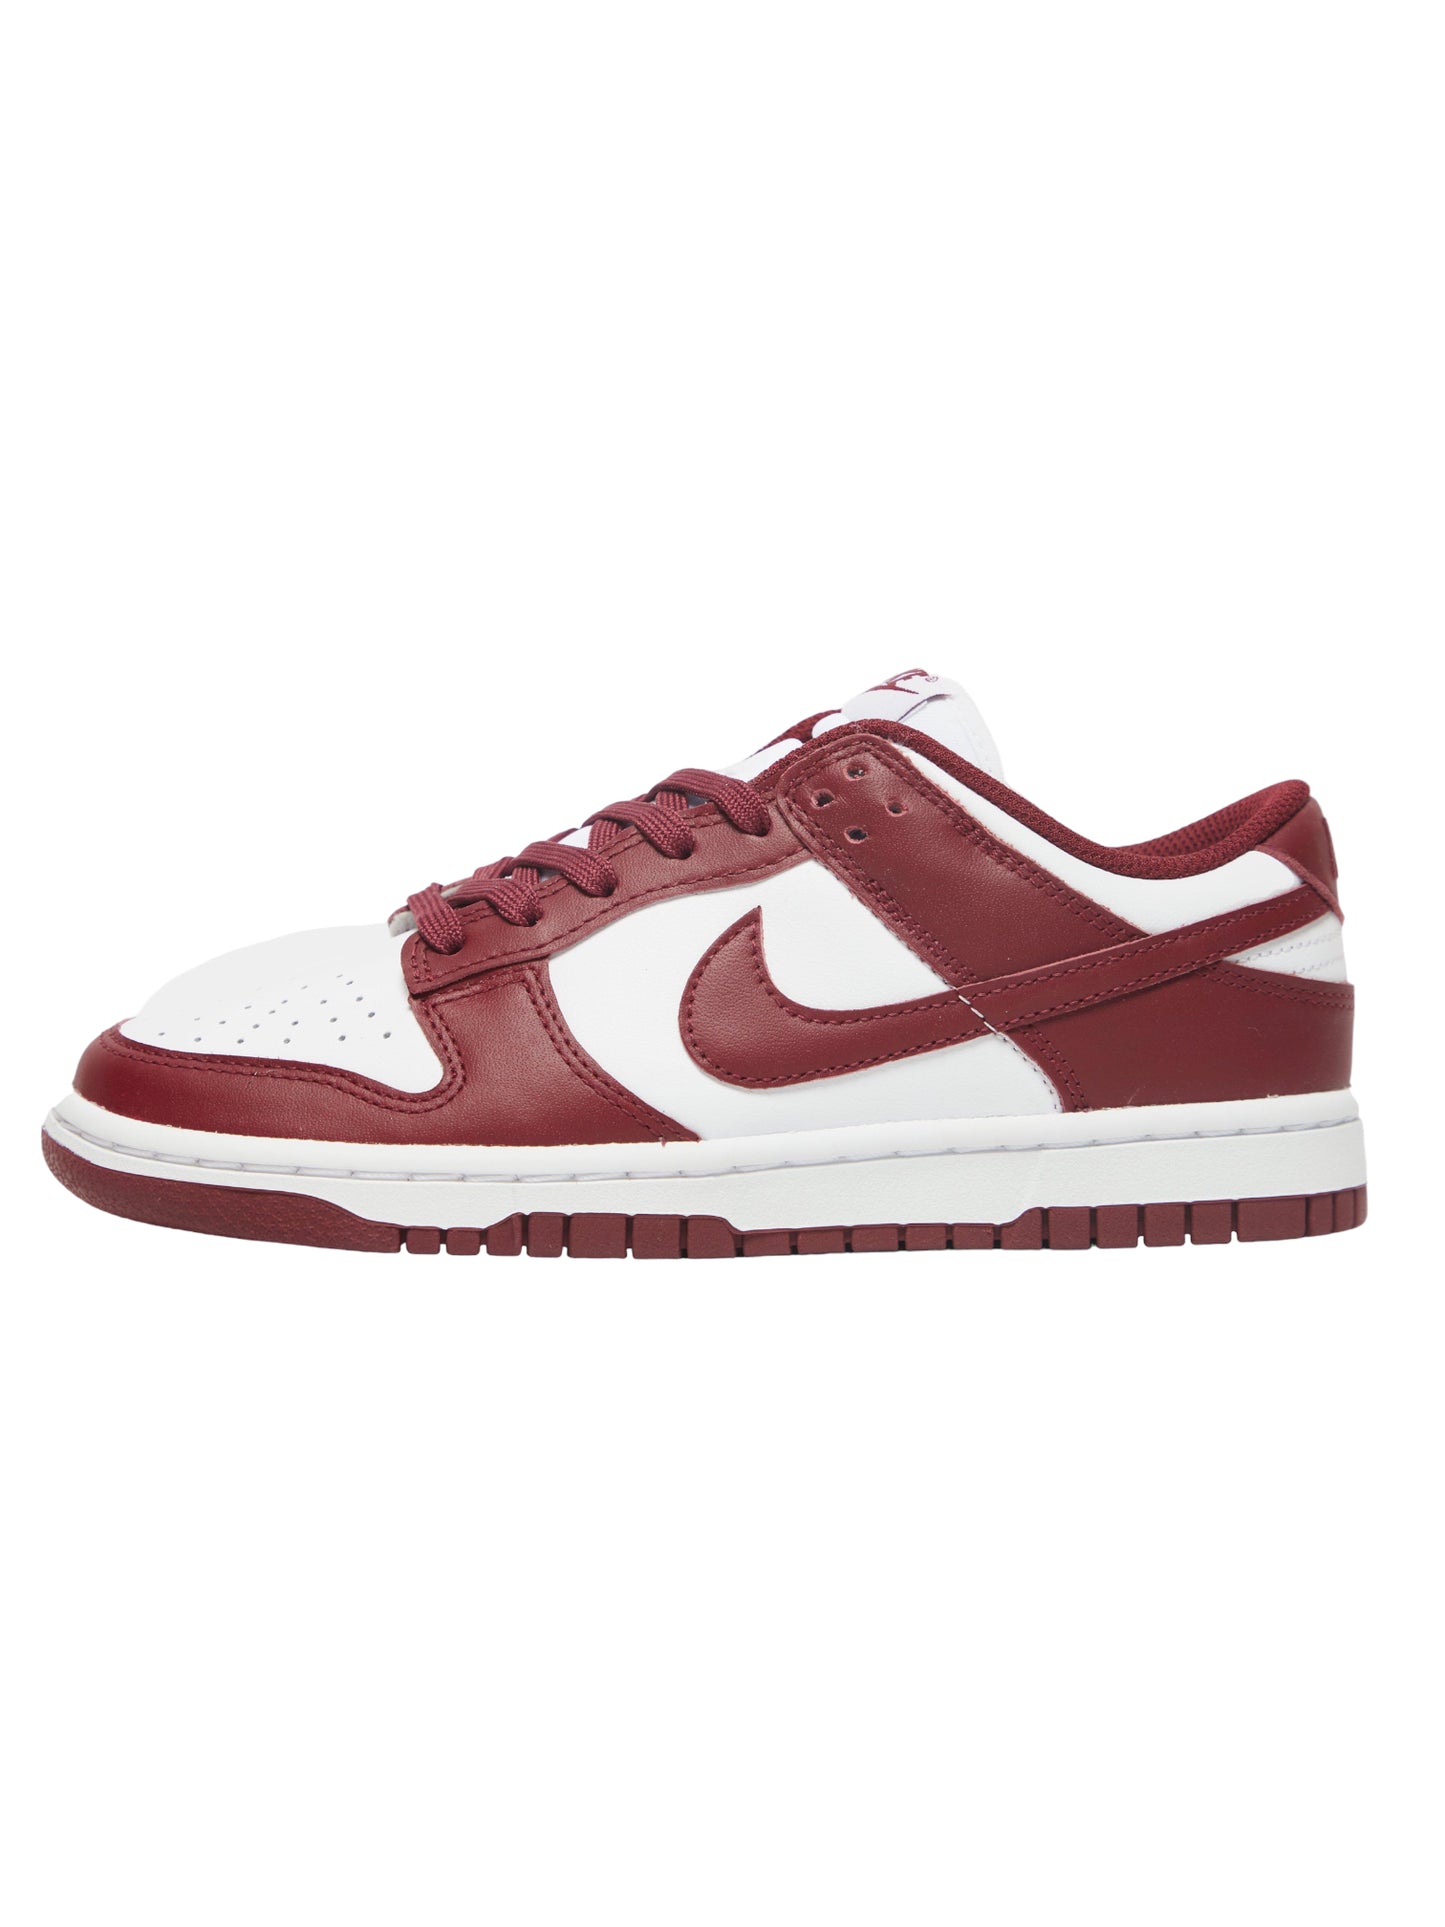 Nike Dunk Low Retro Team Red Sneakers